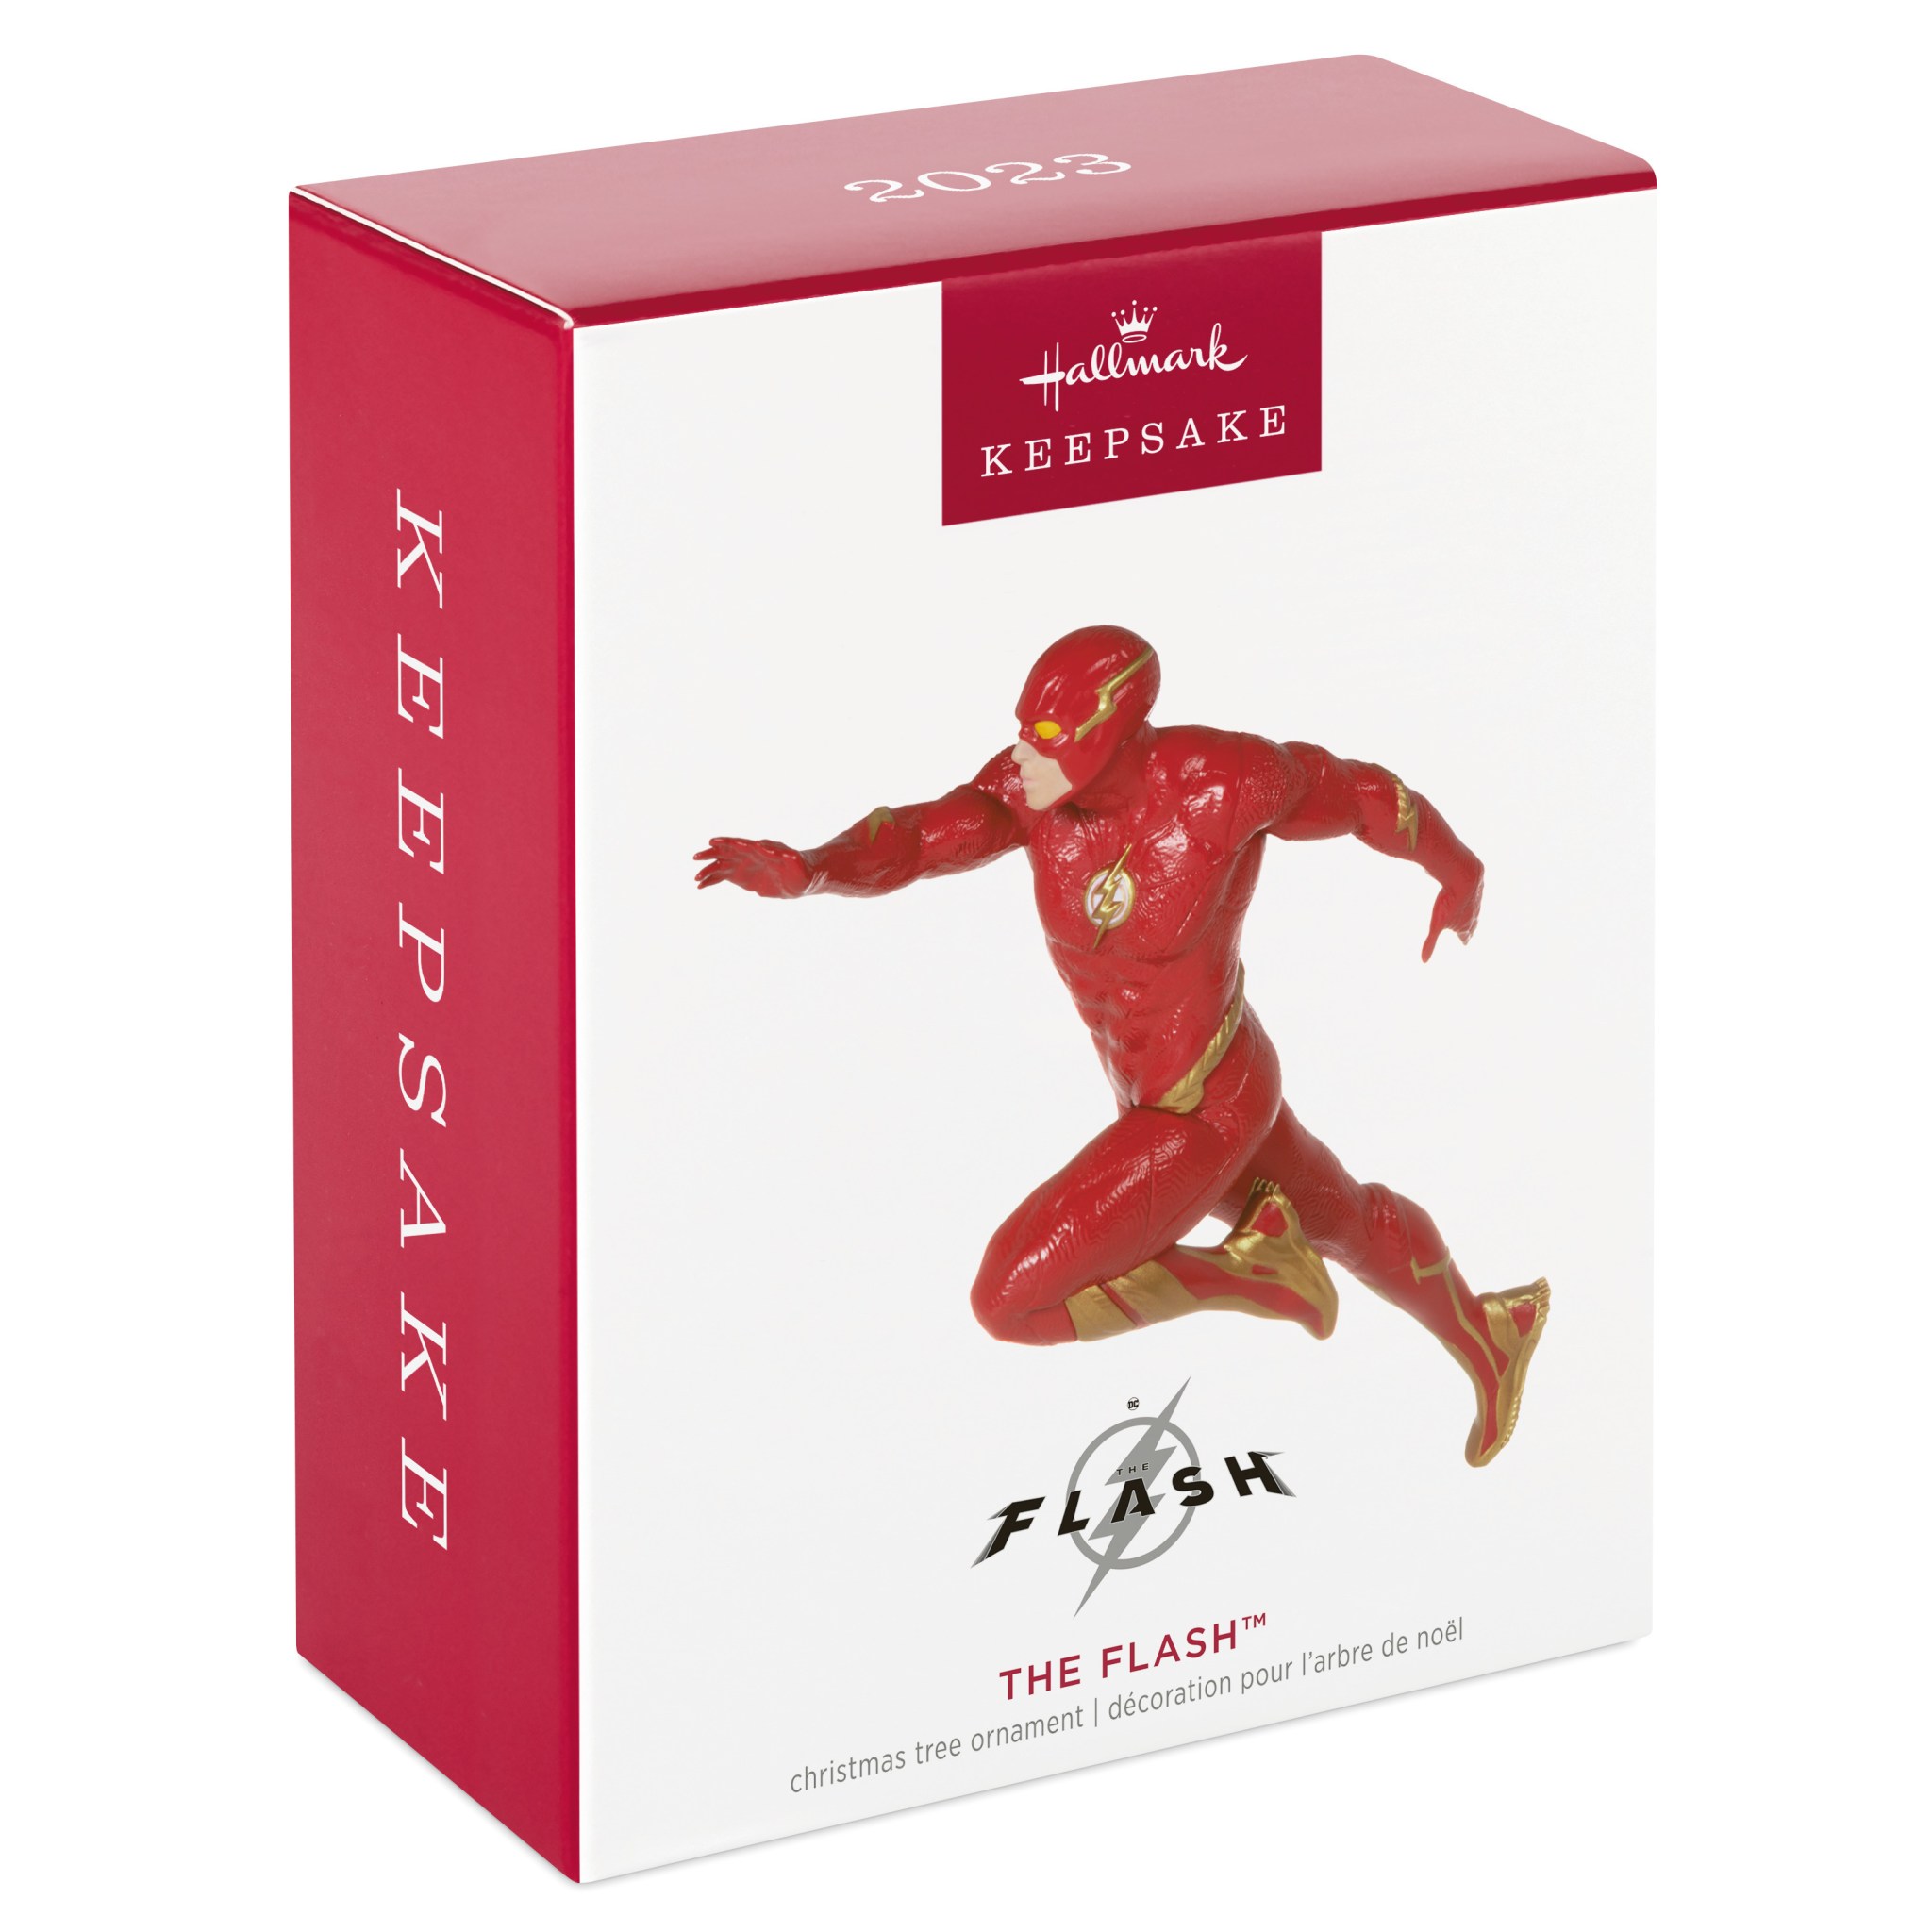 The Flash toys